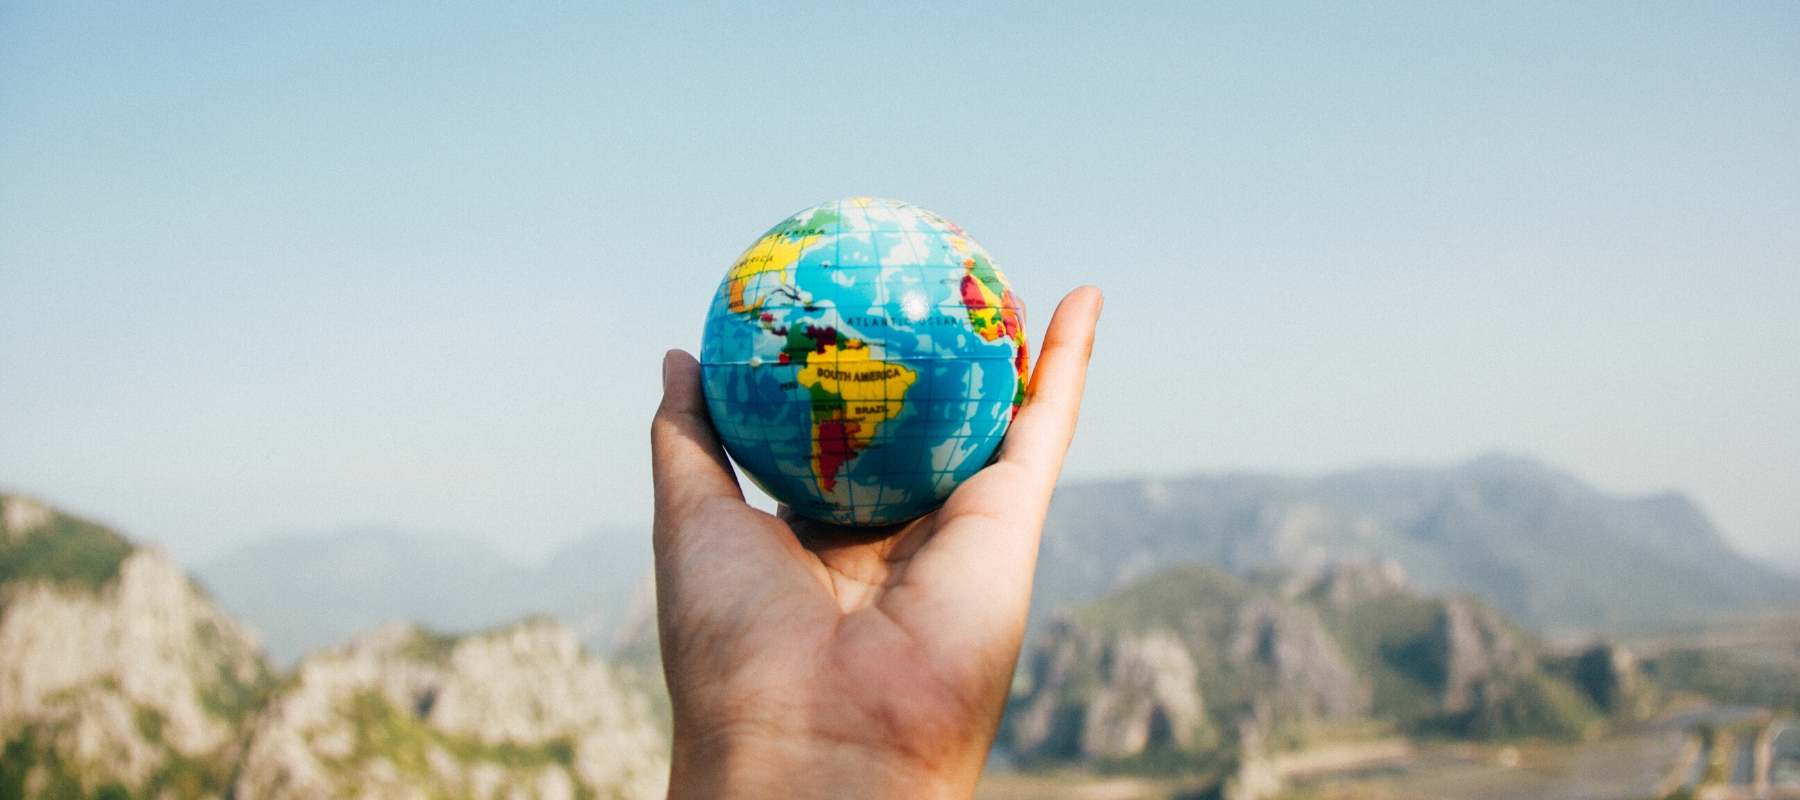 Hand holding a globe of the world against a blue sky